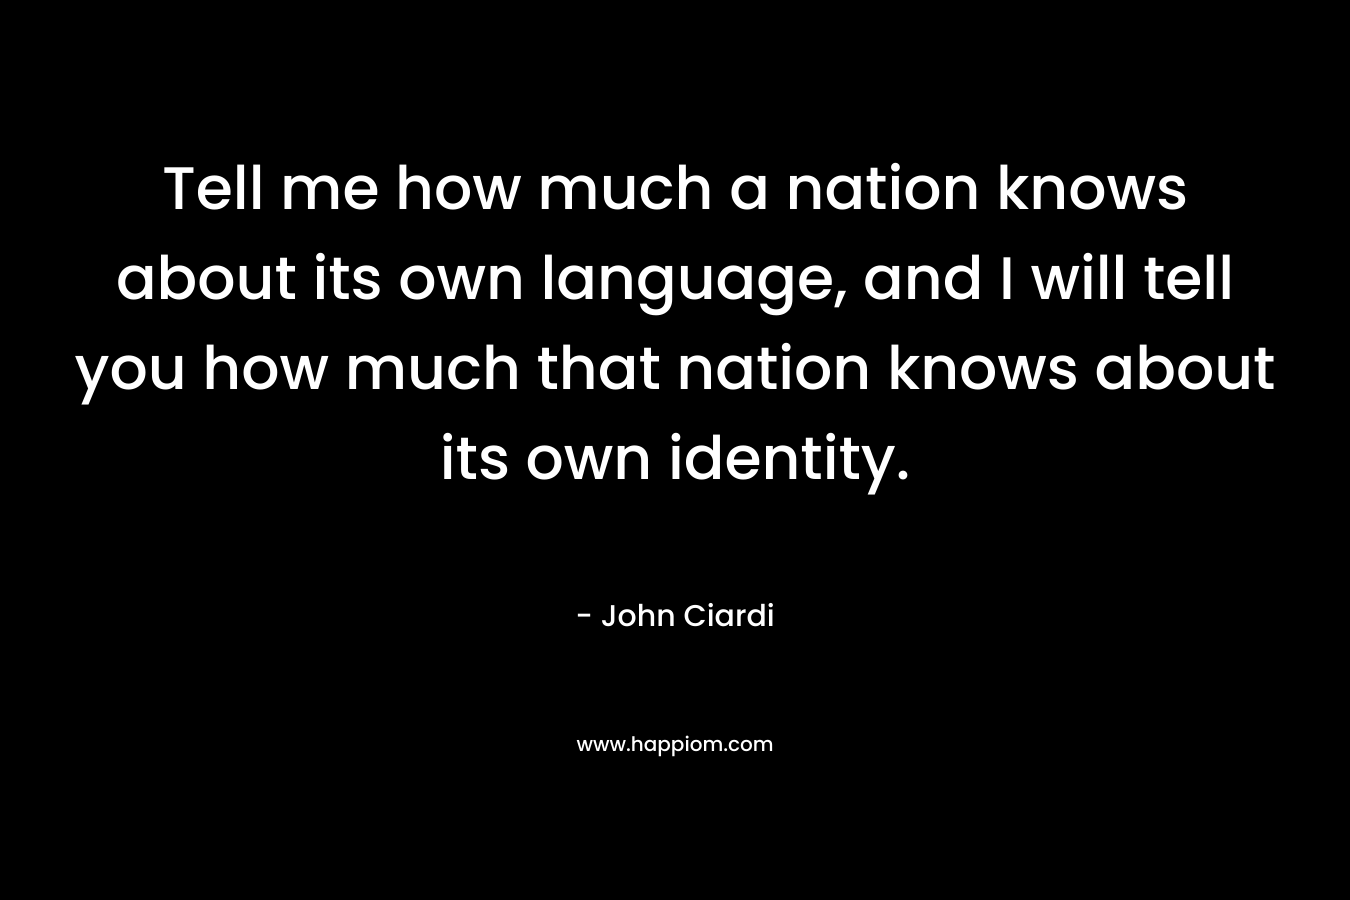 Tell me how much a nation knows about its own language, and I will tell you how much that nation knows about its own identity. – John Ciardi